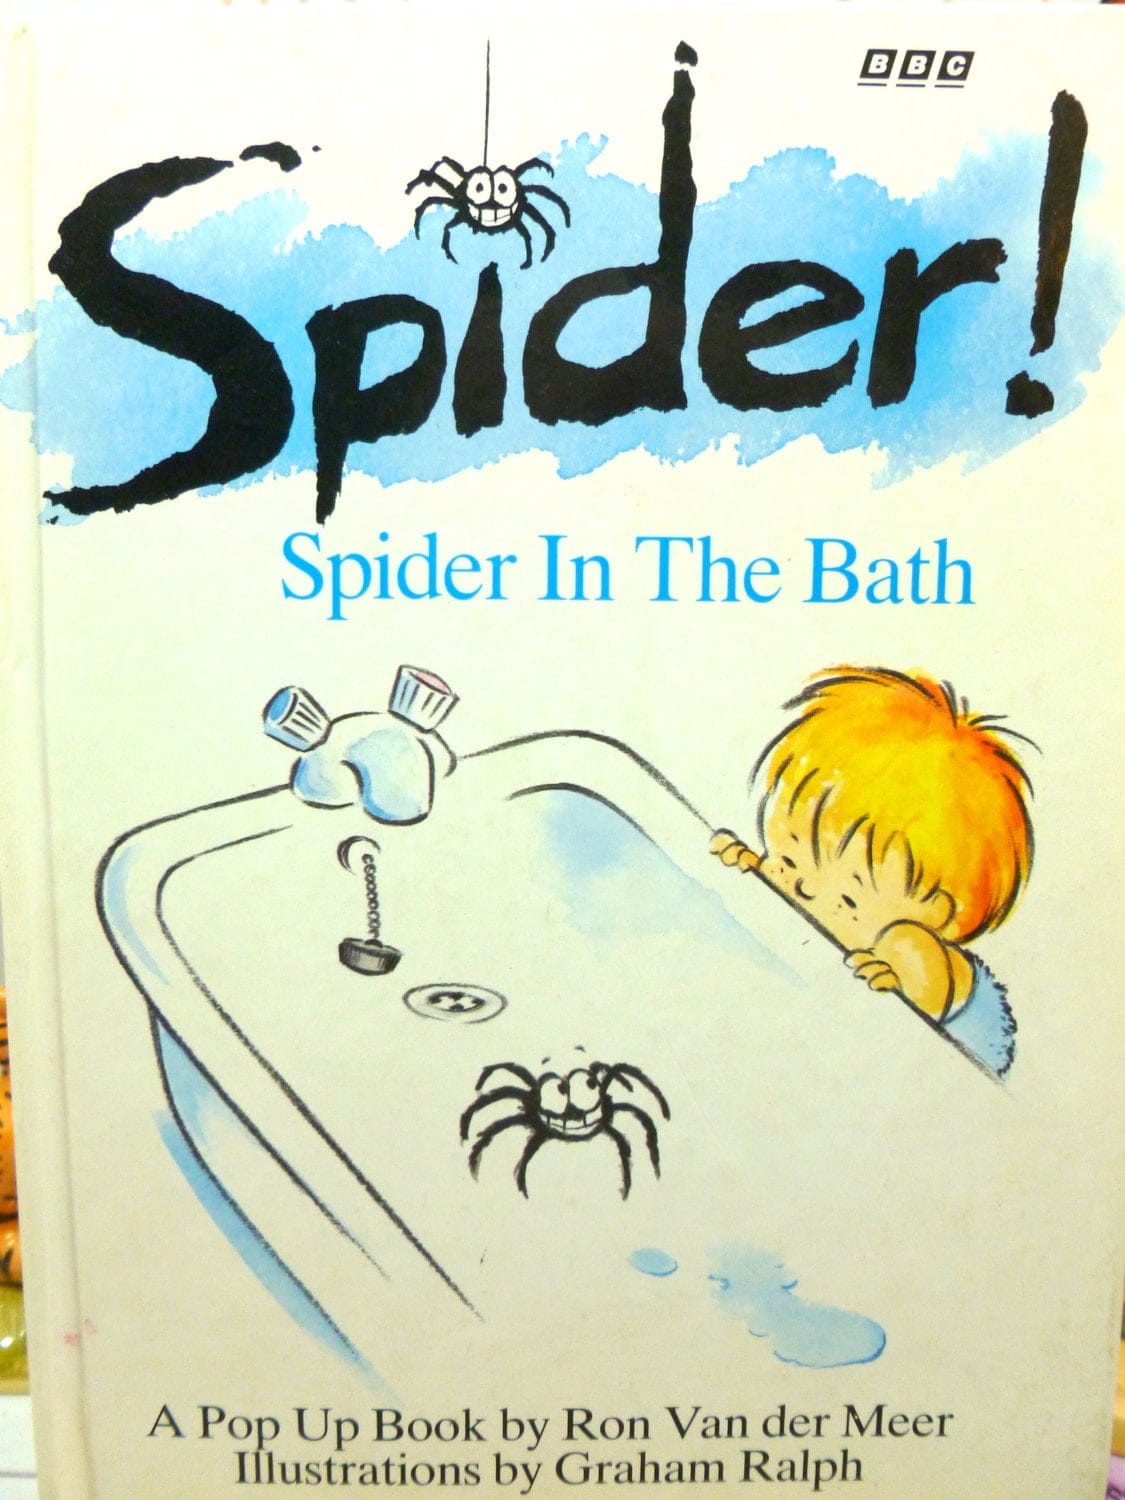 Spider in the Bath Classic Pop Up Book BBC 1st Edition Hardback 1991 Illustrated Song Words and Pictures Scarce